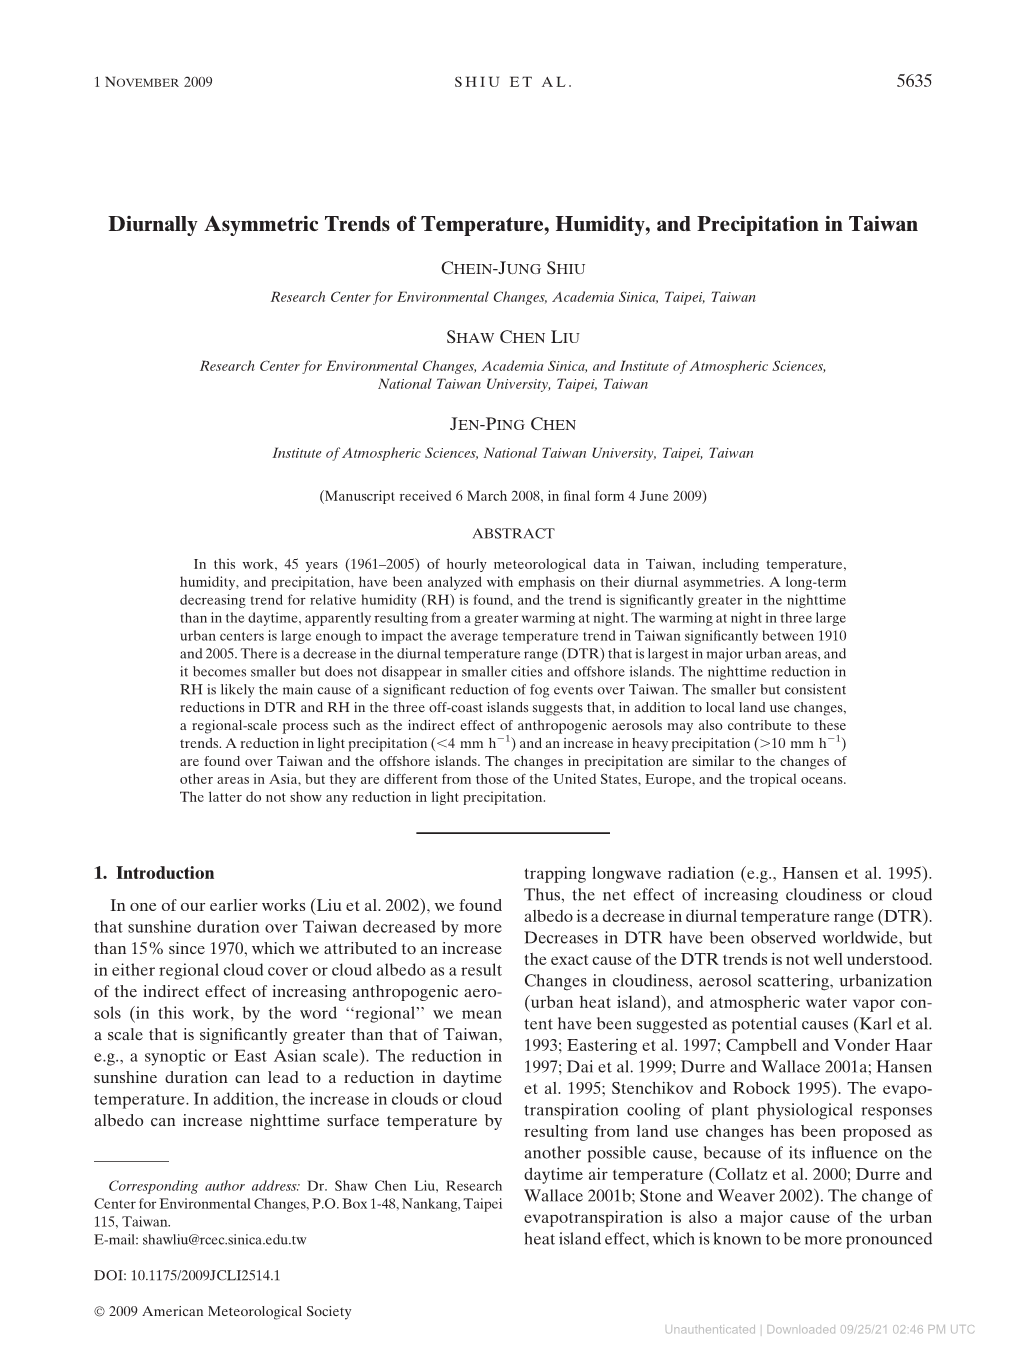 Diurnally Asymmetric Trends of Temperature, Humidity, and Precipitation in Taiwan